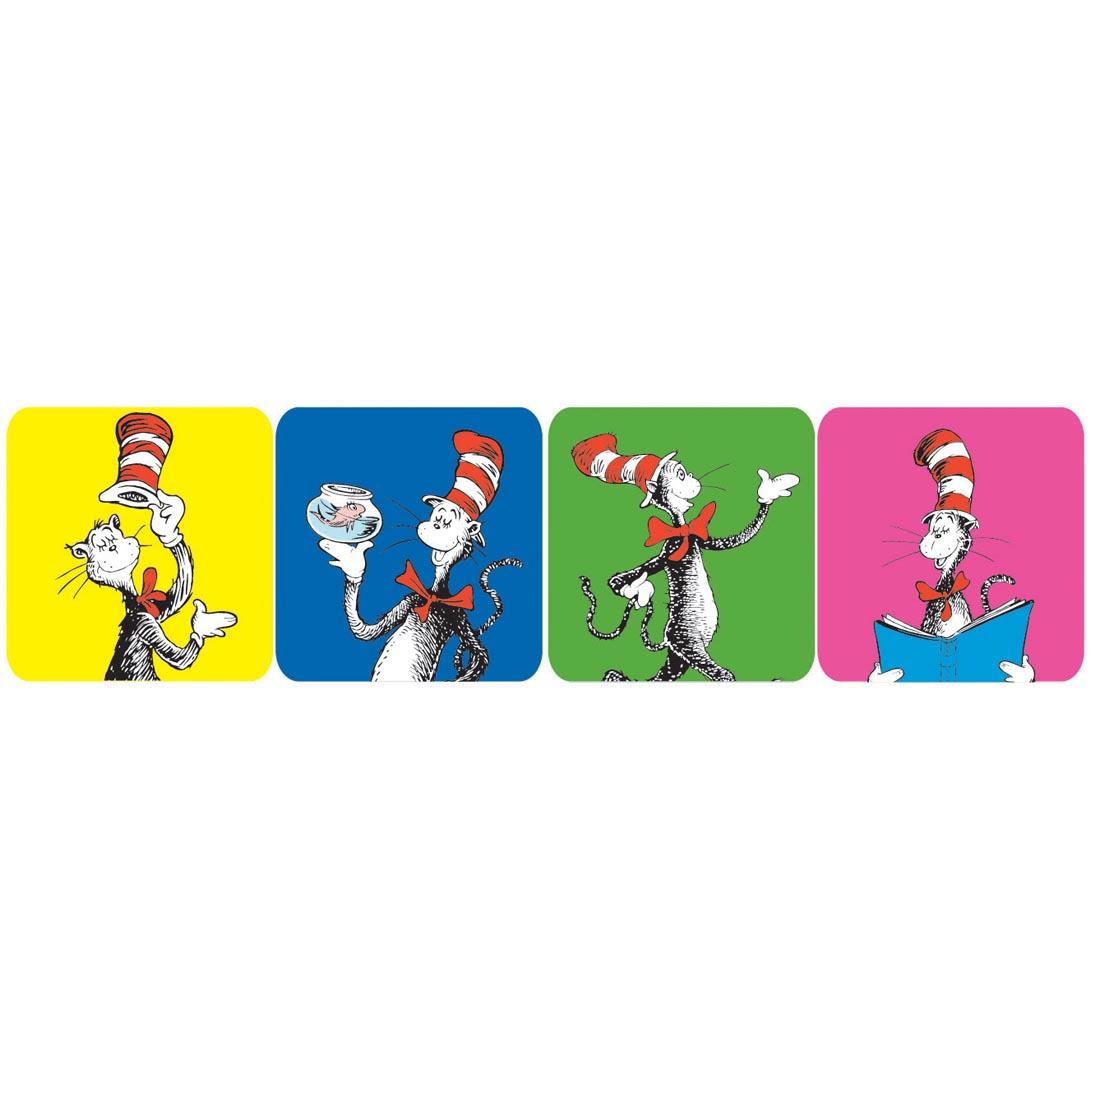 Dr. Seuss Cat in the Hat Stickers by Eureka